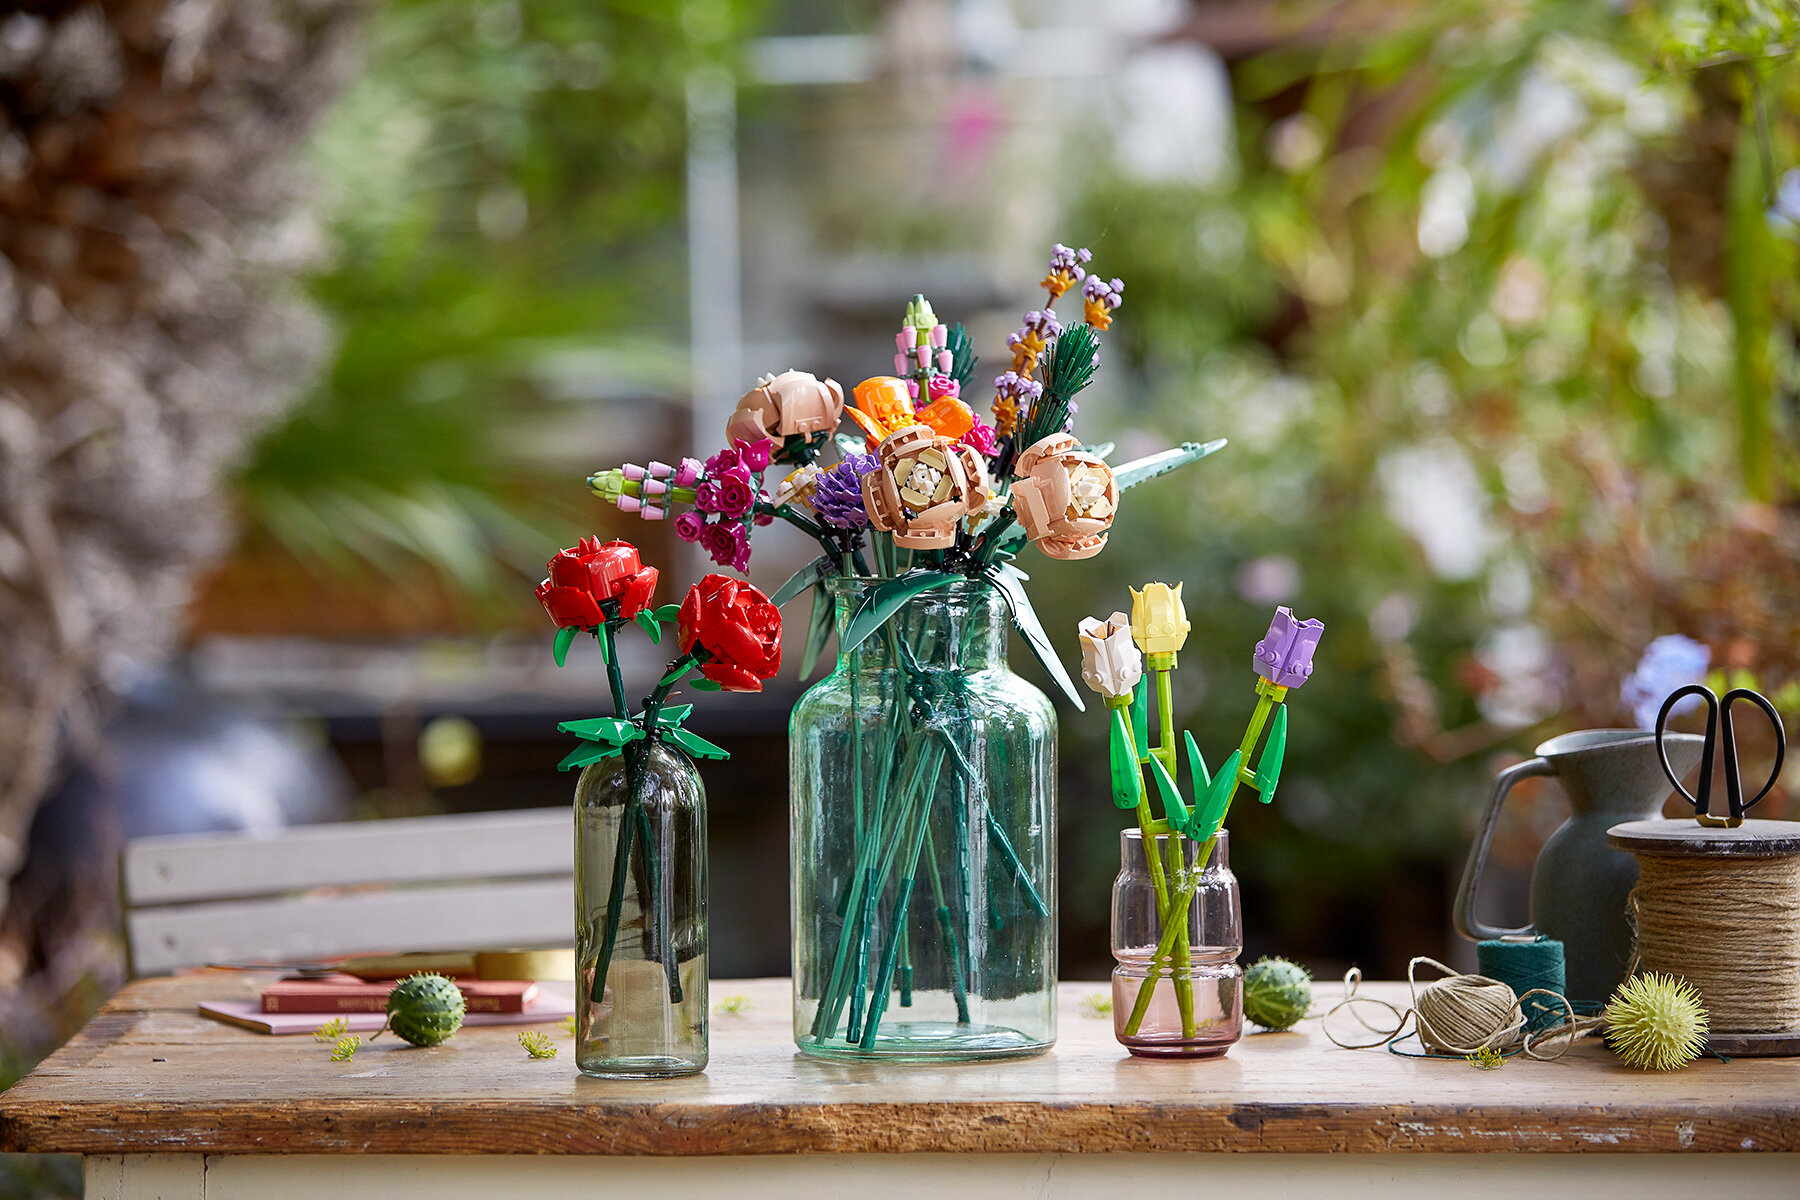 let your creativity blossom with the allnew LEGO botanical collection